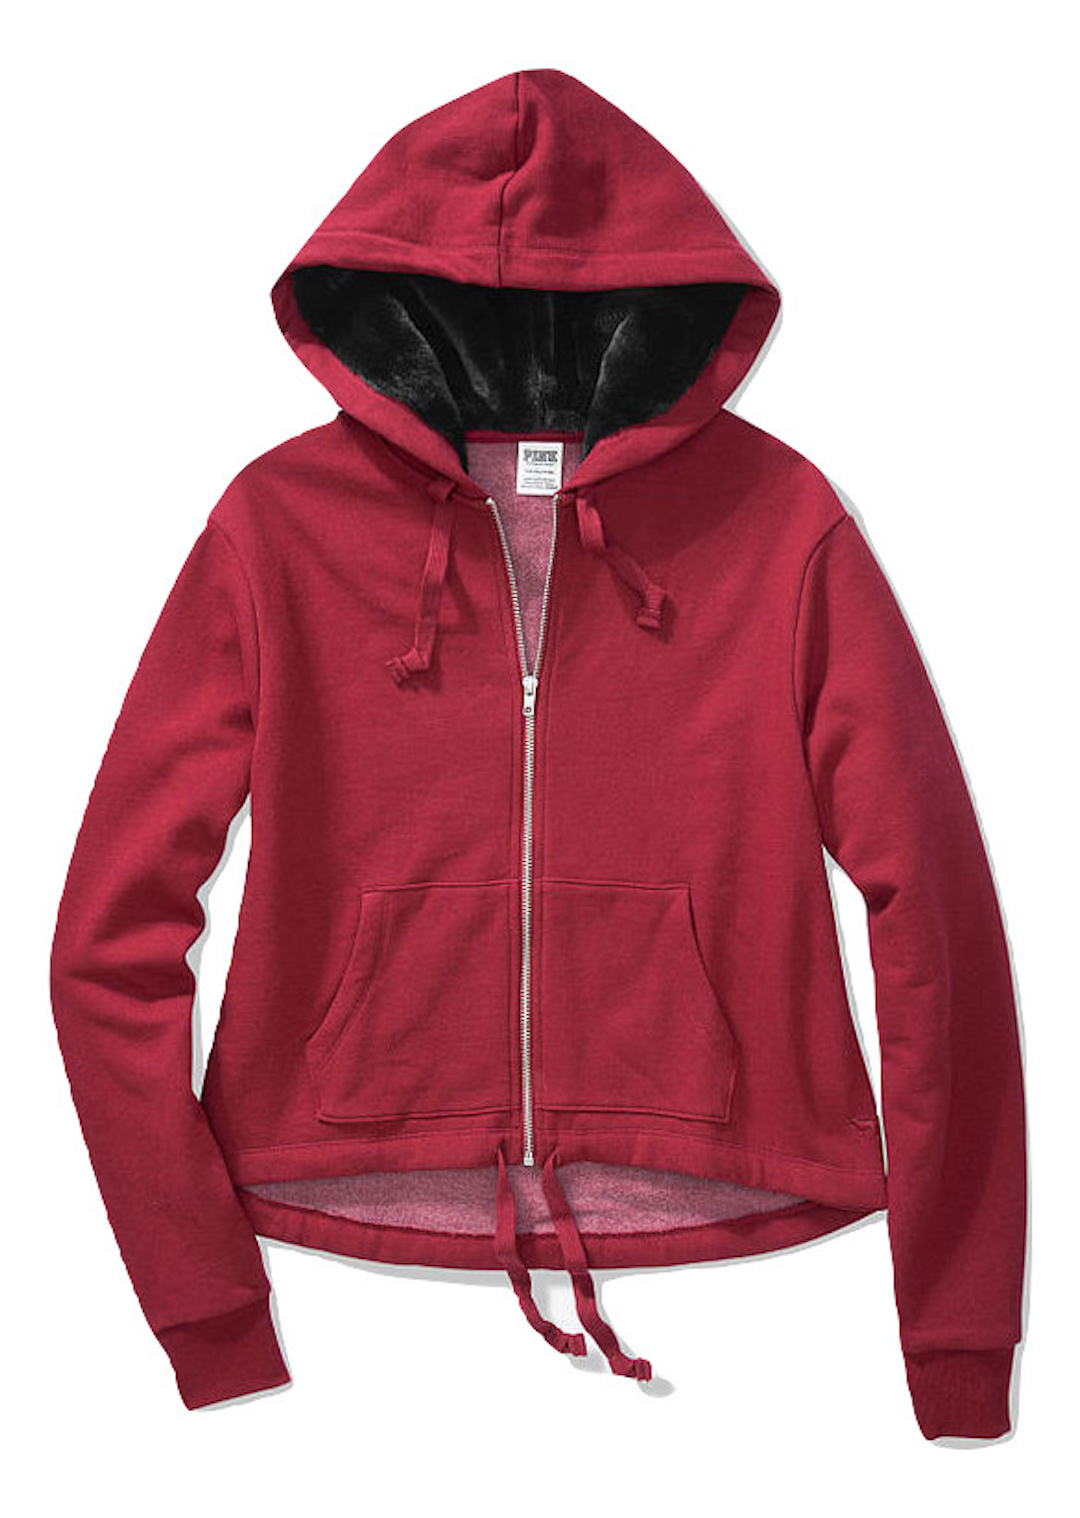 Victoria's Secret Pink Faux Fur Lined Hood Full Zip Color Maroon Size XSmall NEW - image 1 of 1